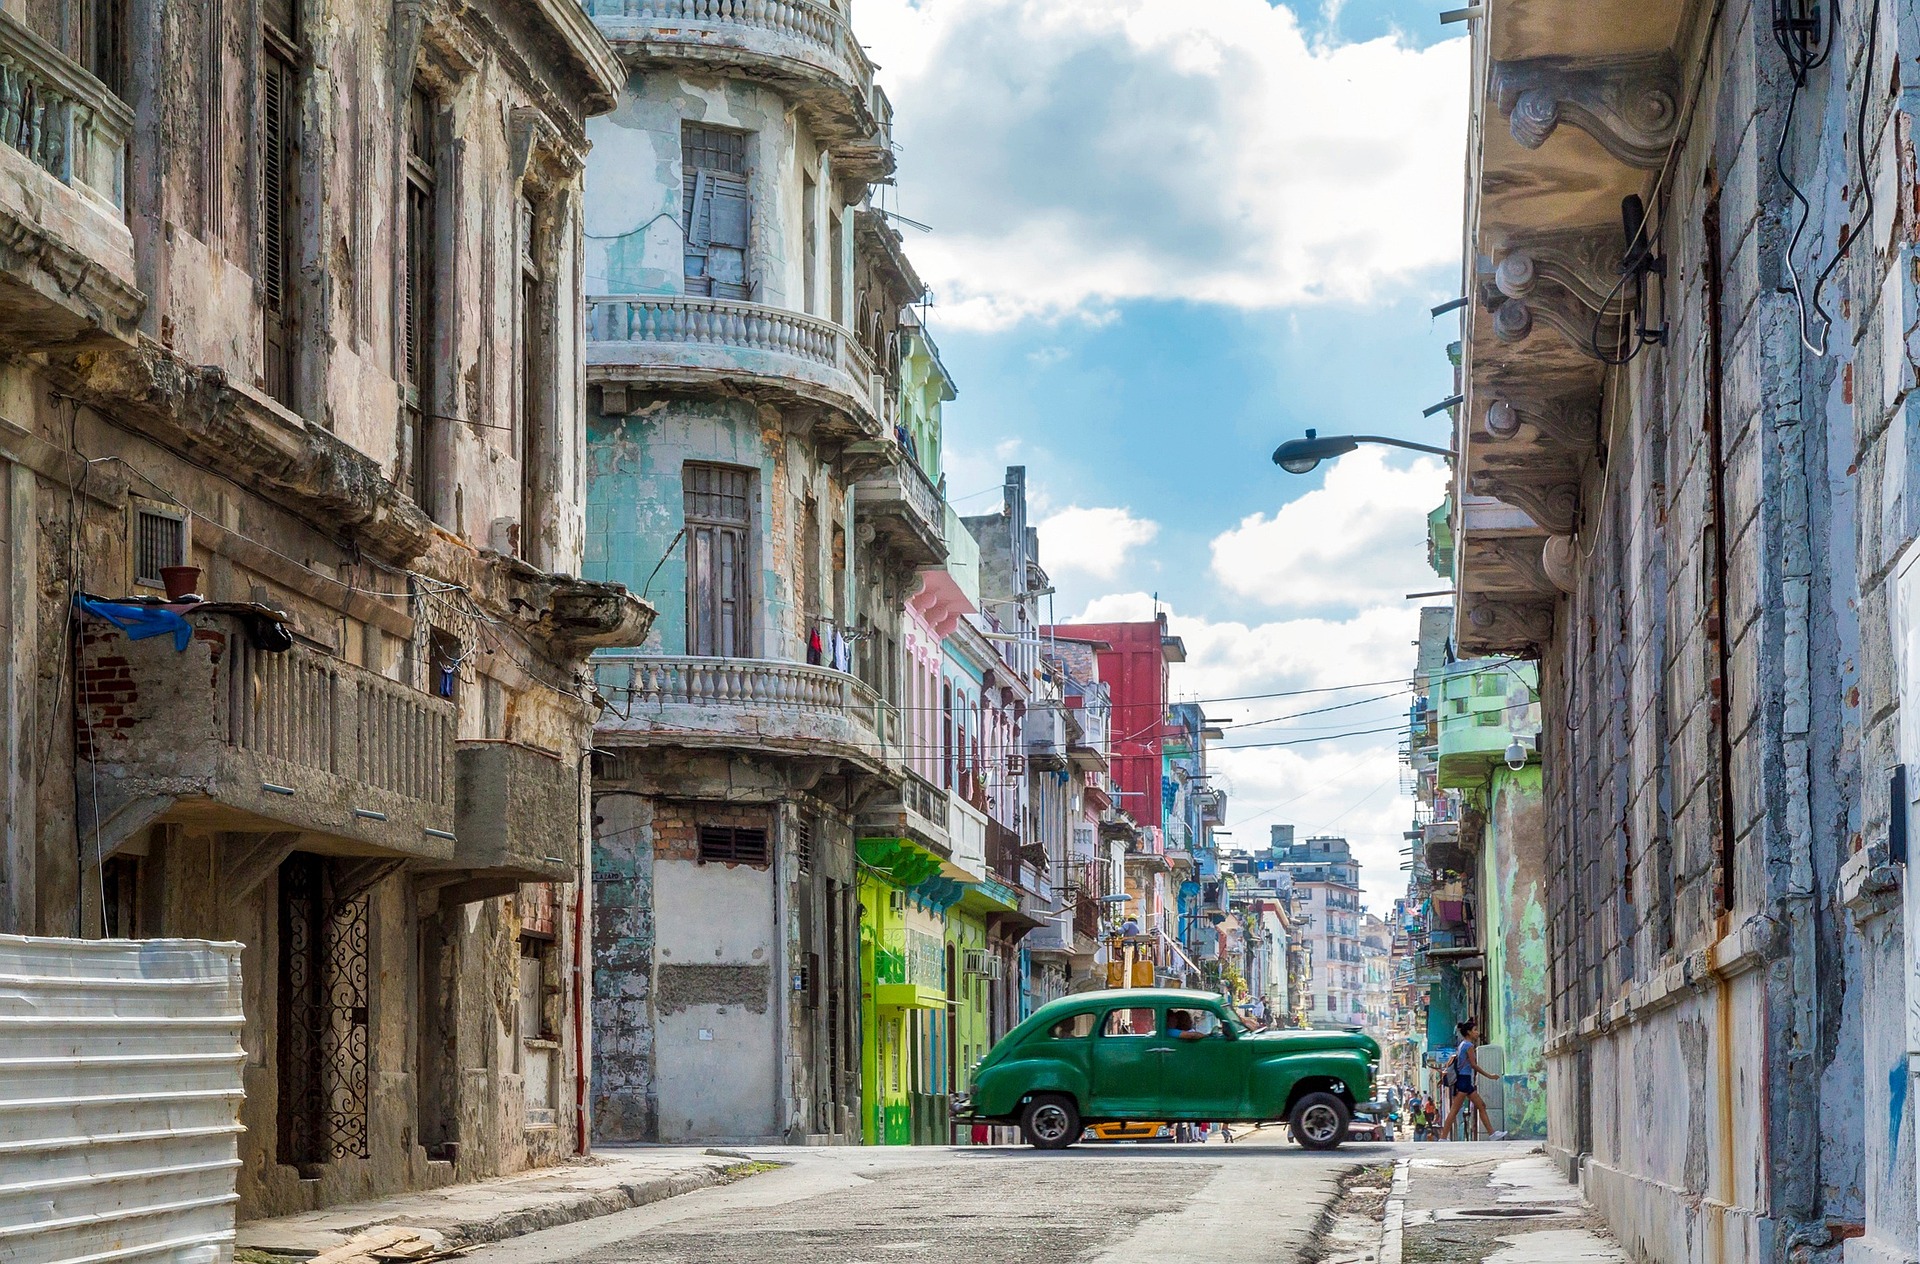 CUBA WELCOMED ALMOST ONE MILLION INTERNATIONAL TOURISTS UP TO AUGUST